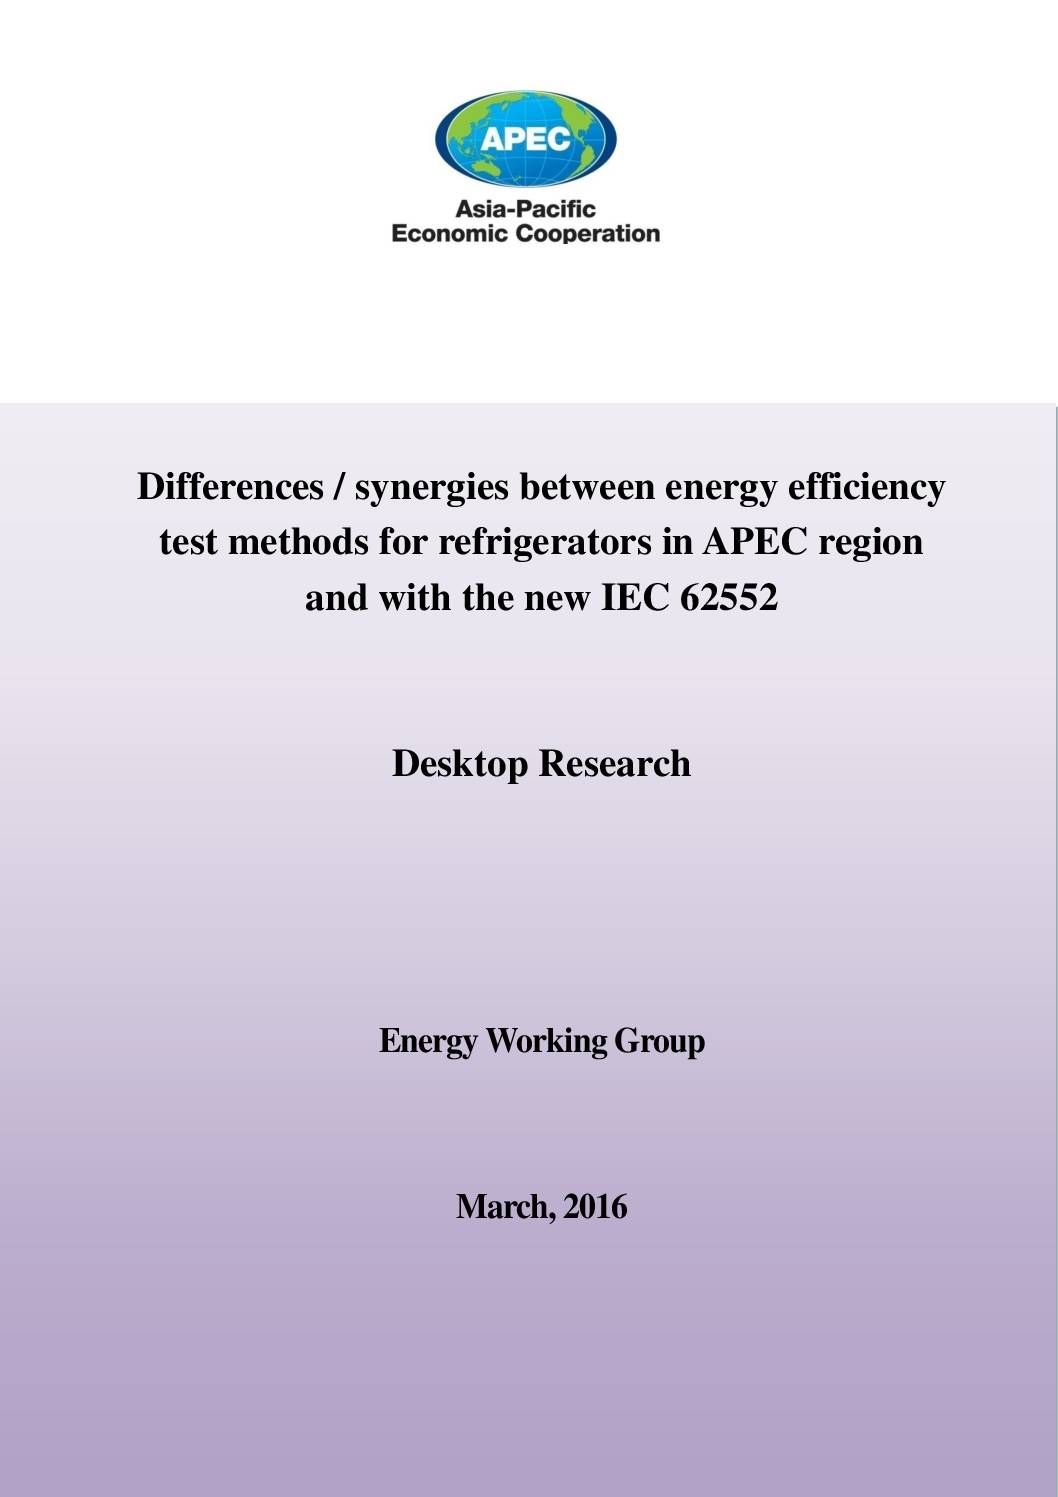 Differences / Synergies between Energy Efficiency Test Methods for Refrigerators in APEC Region and with the new IEC 62552